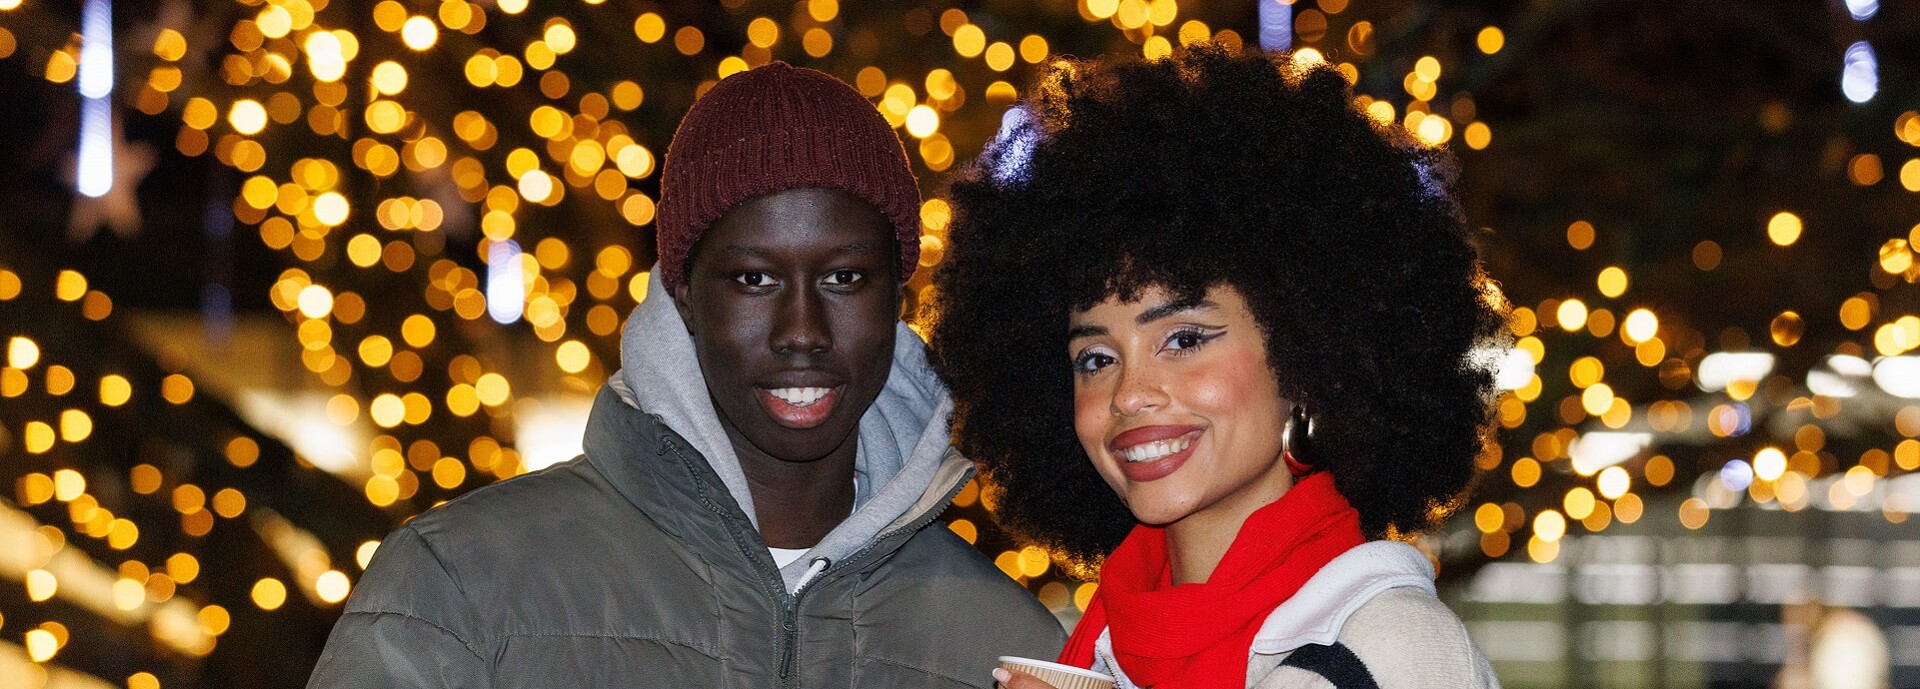 Students at a Christmas light switch on event